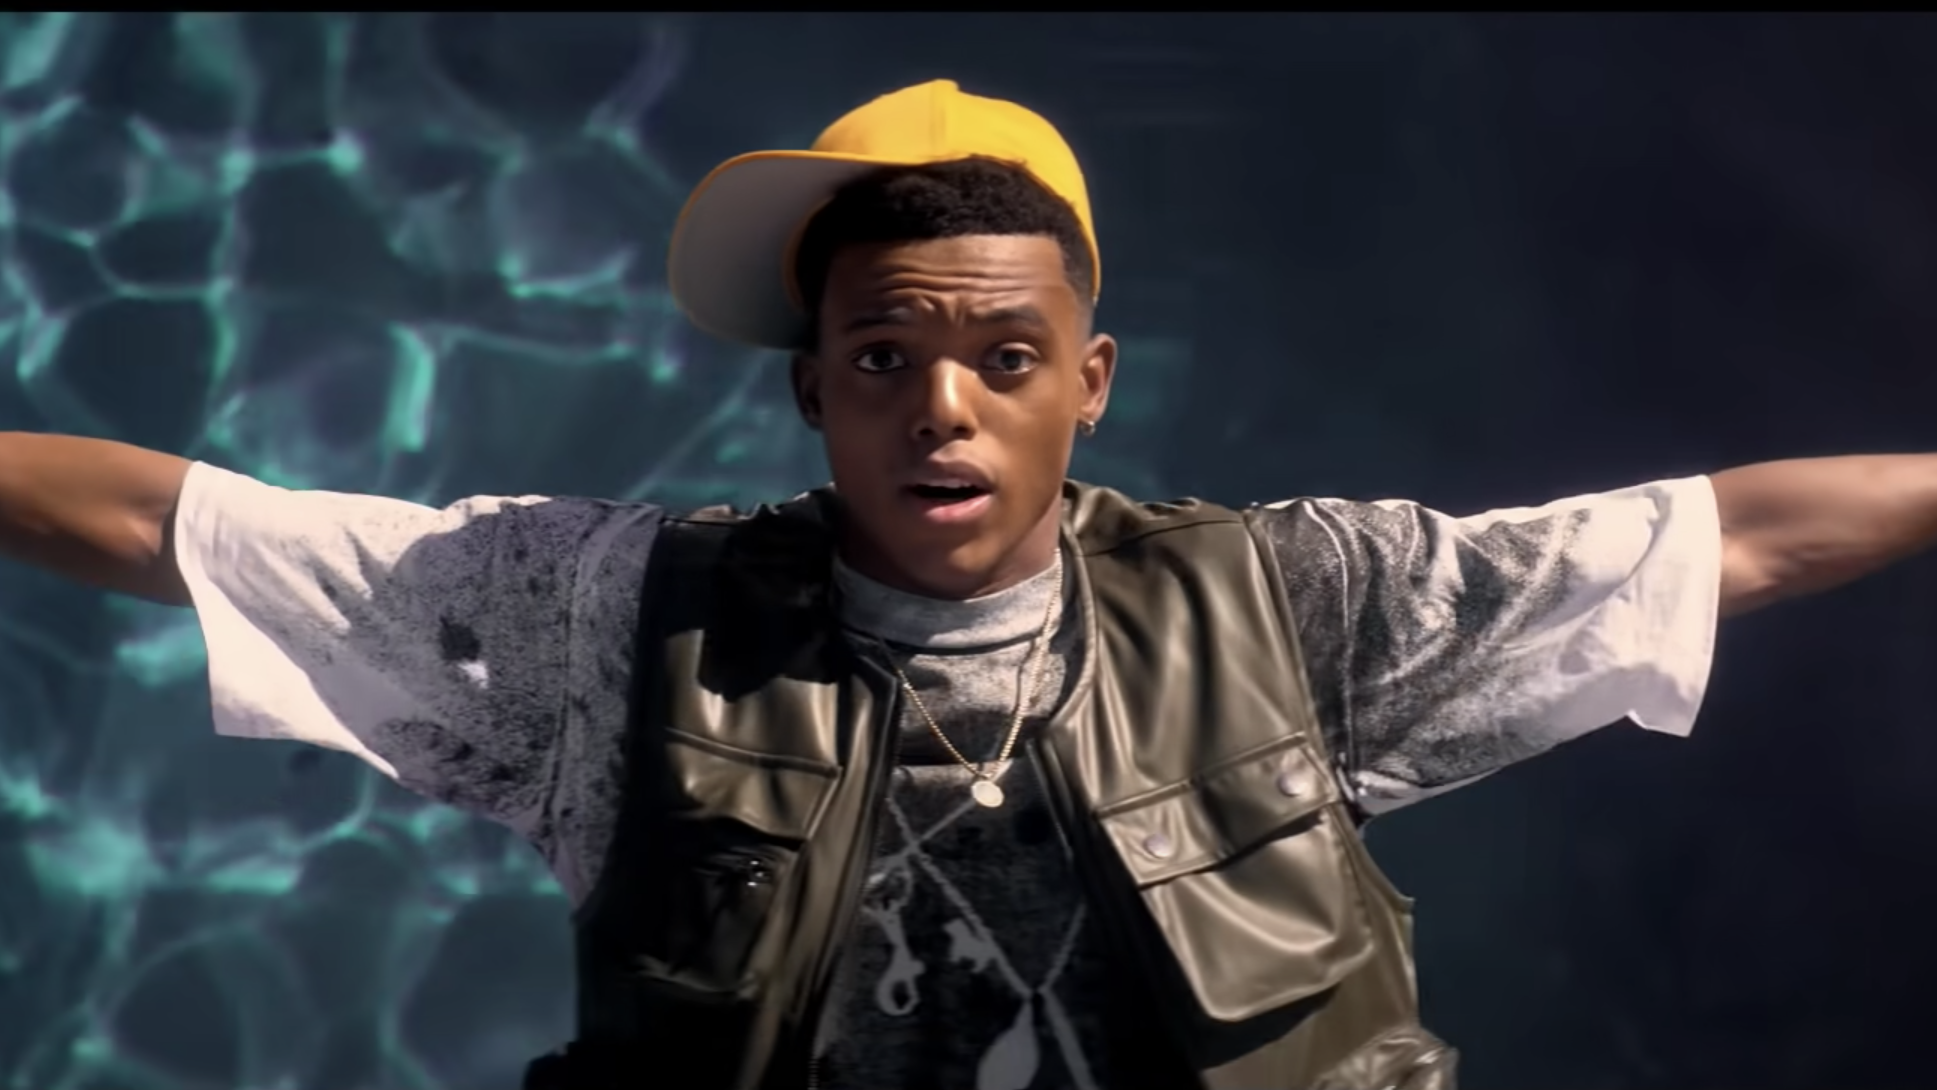 Will Smith retells the story of the Fresh Prince in dramatic teaser for Bel-Air